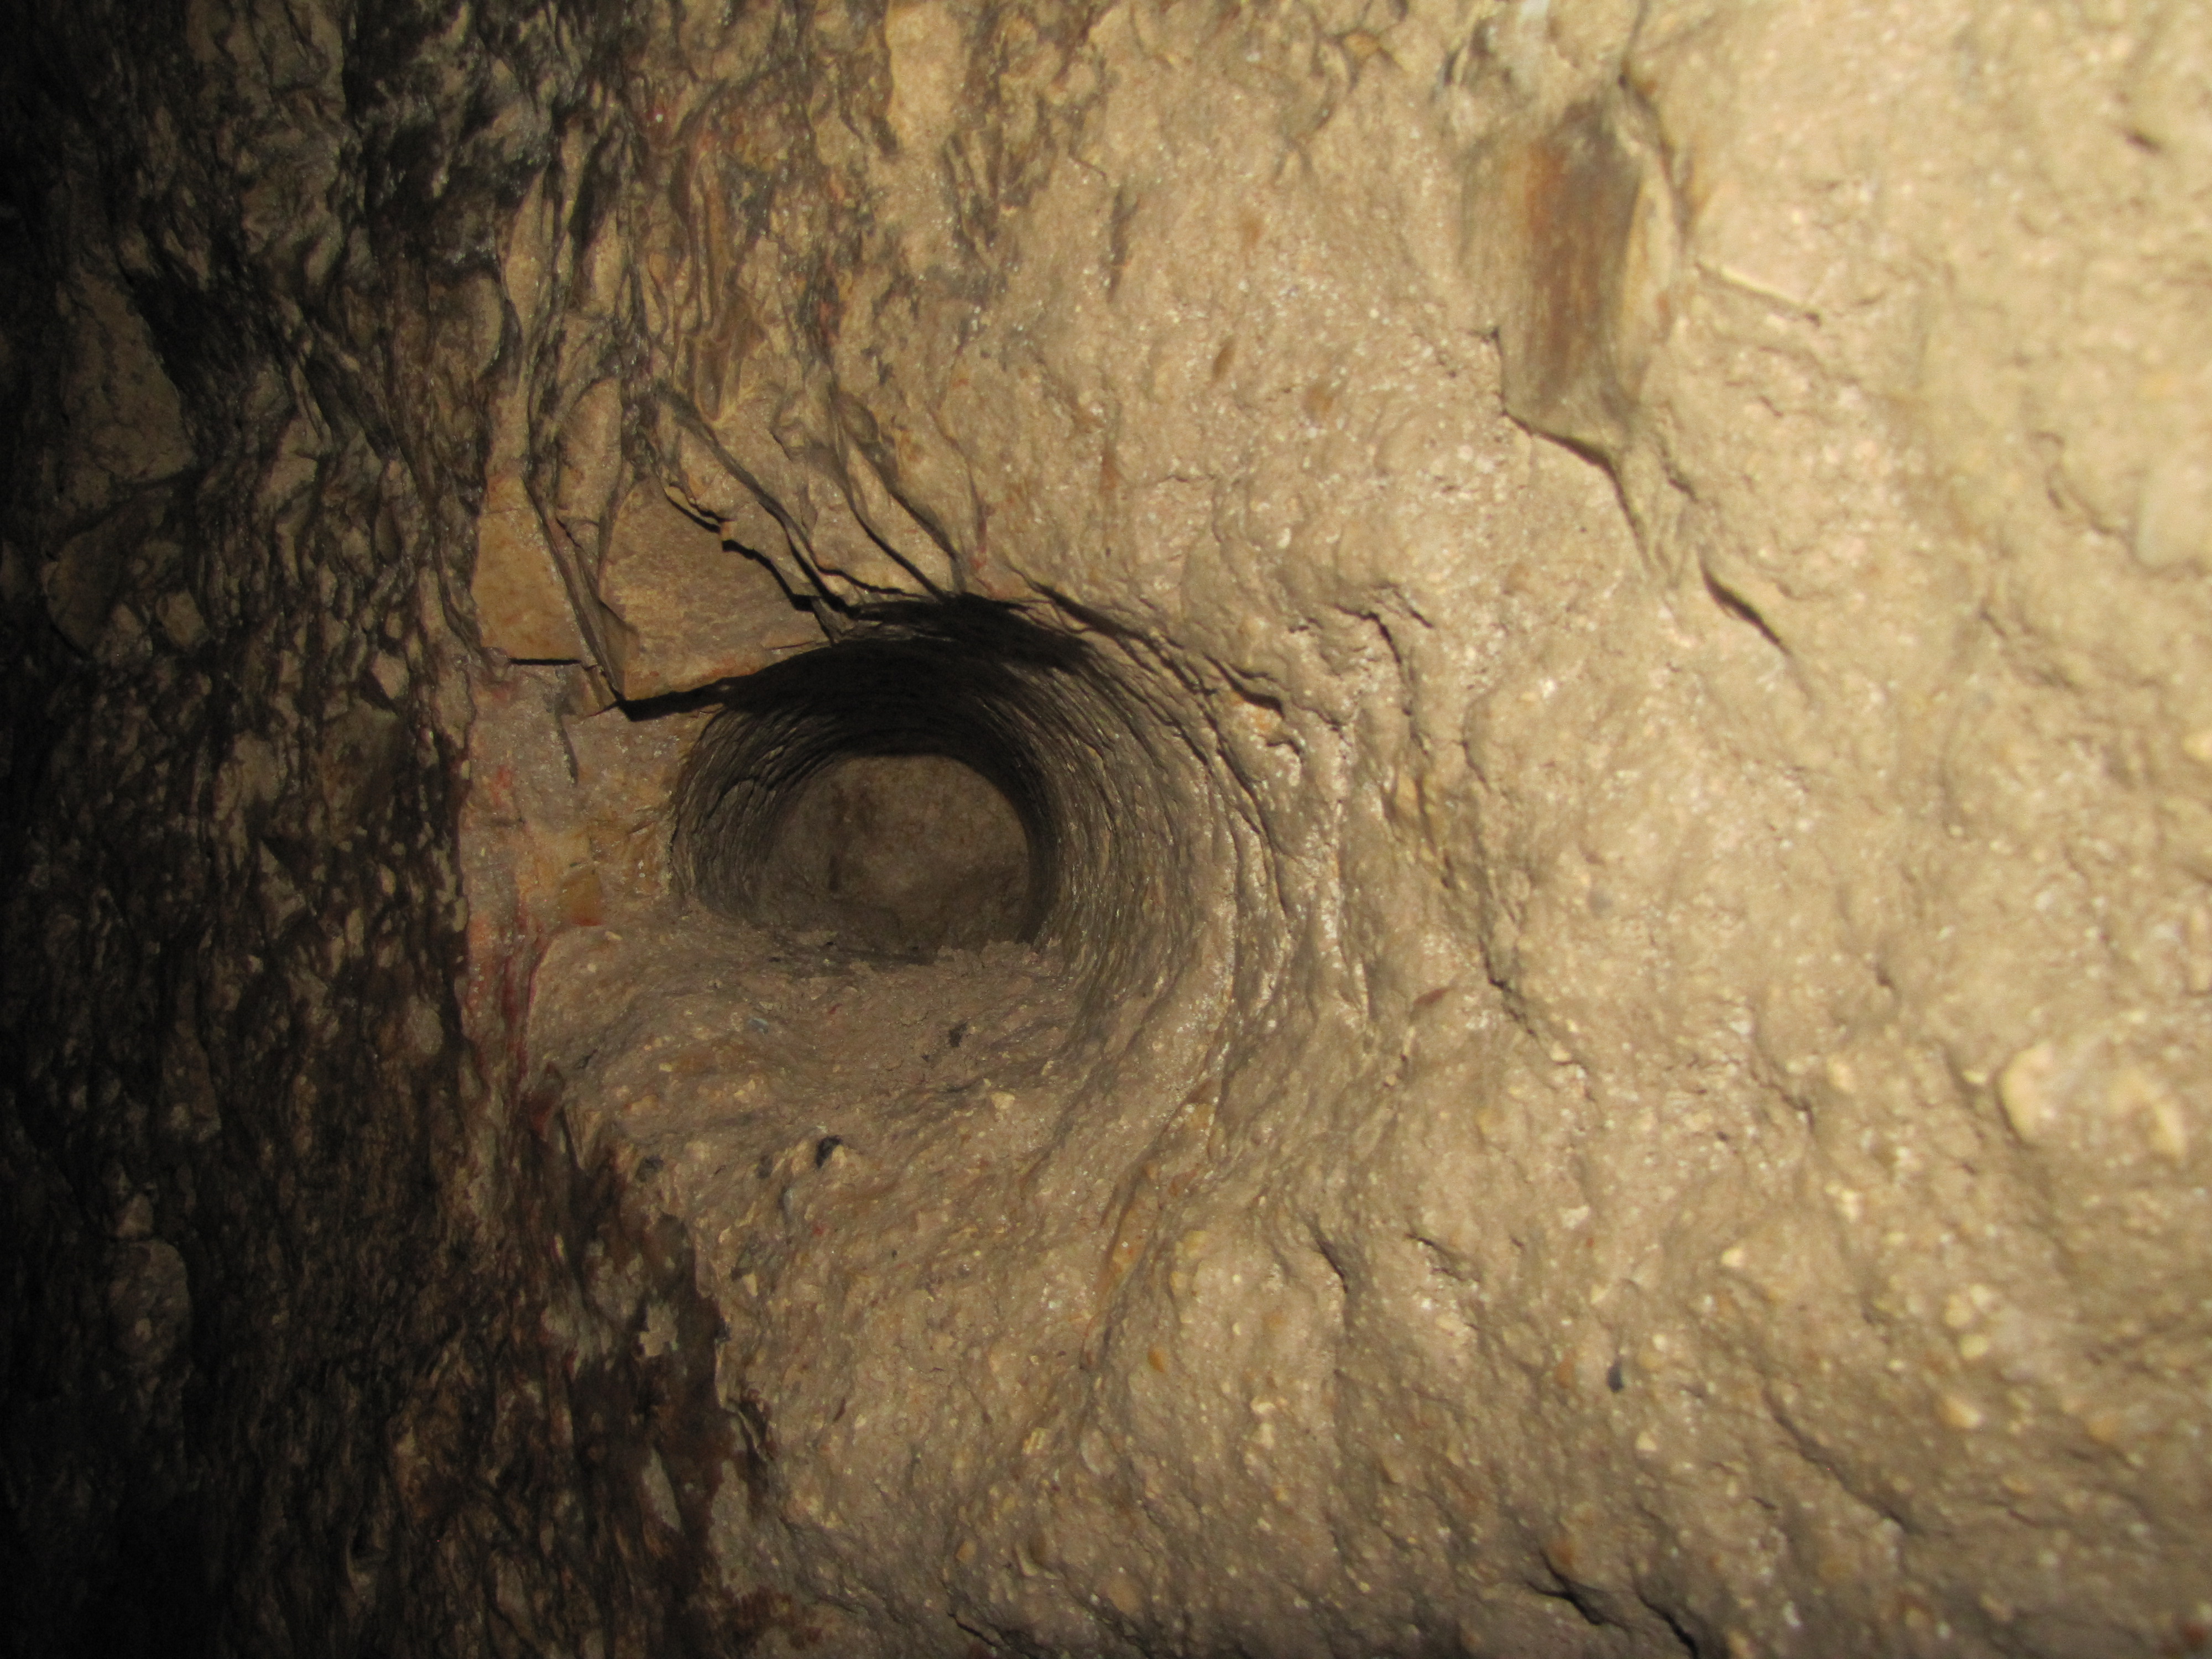 Chiseled hole in the bedrock to hold a torch for light for the workers in the tunnel